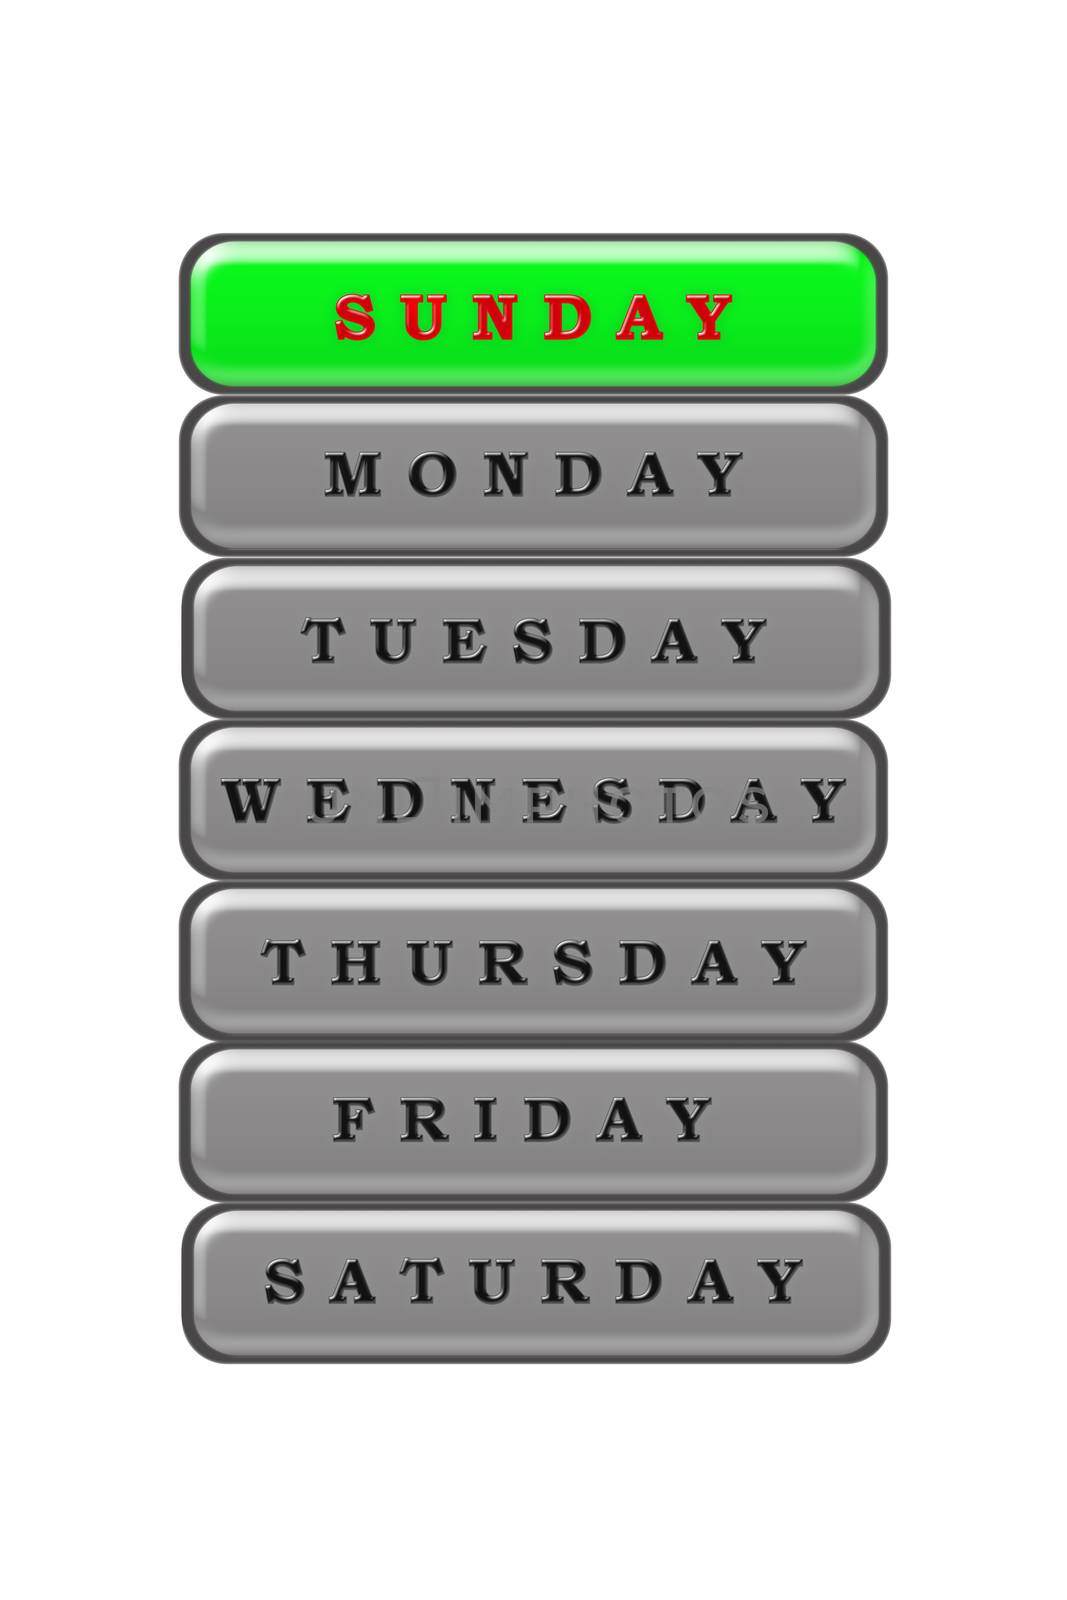 In the days of the week list, Sunday is highlighted in red on a  by Grommik